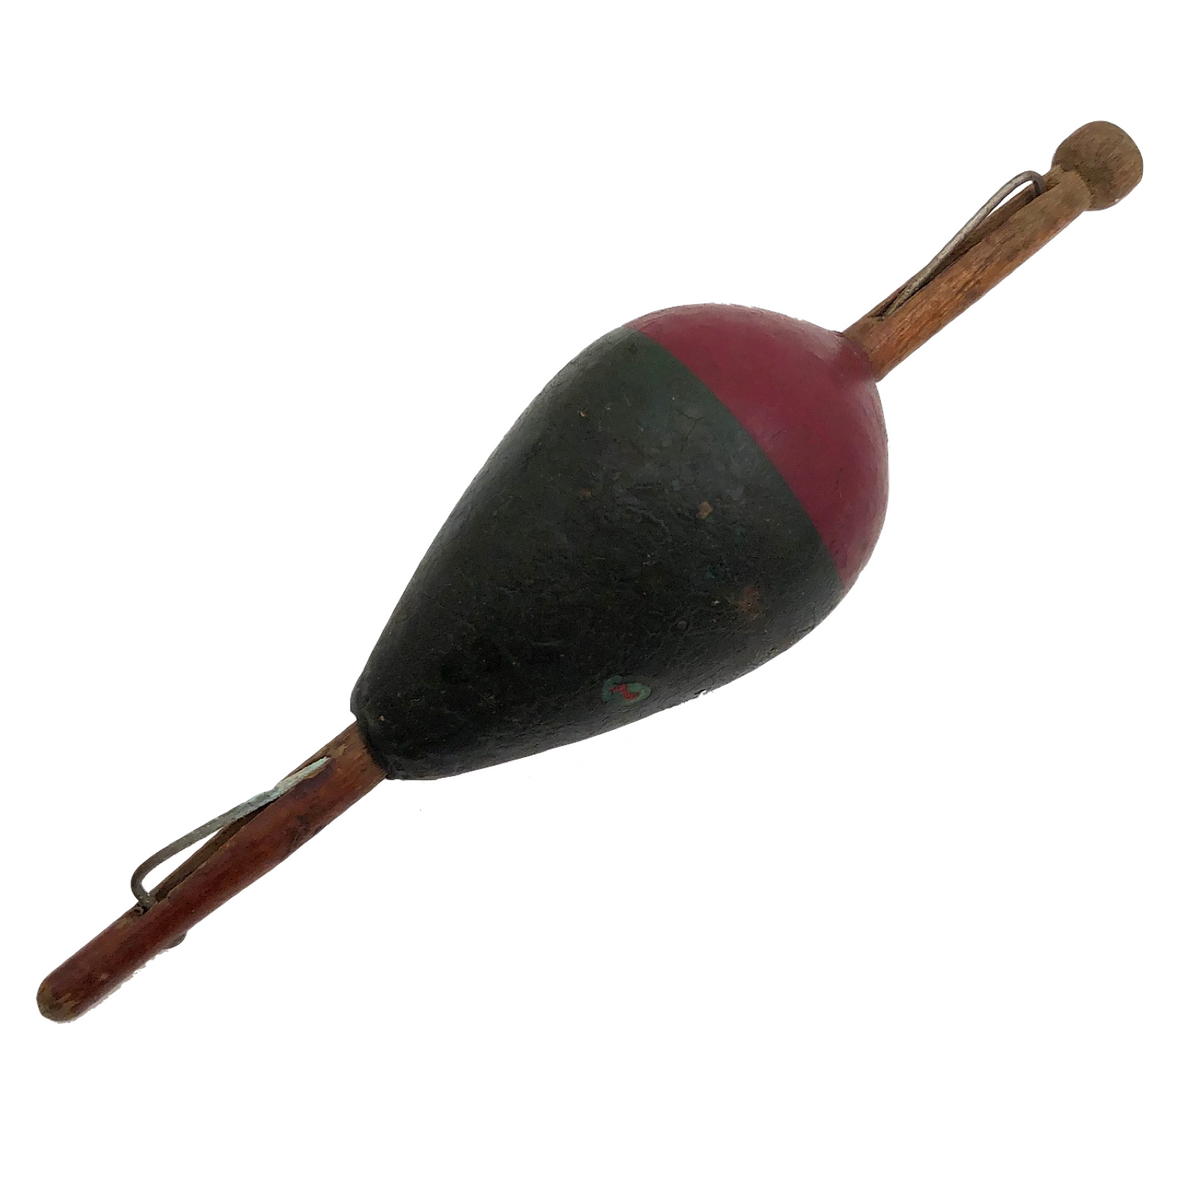 Antique Wooden Painted Fishing Float or Bobber – critical EYE Finds